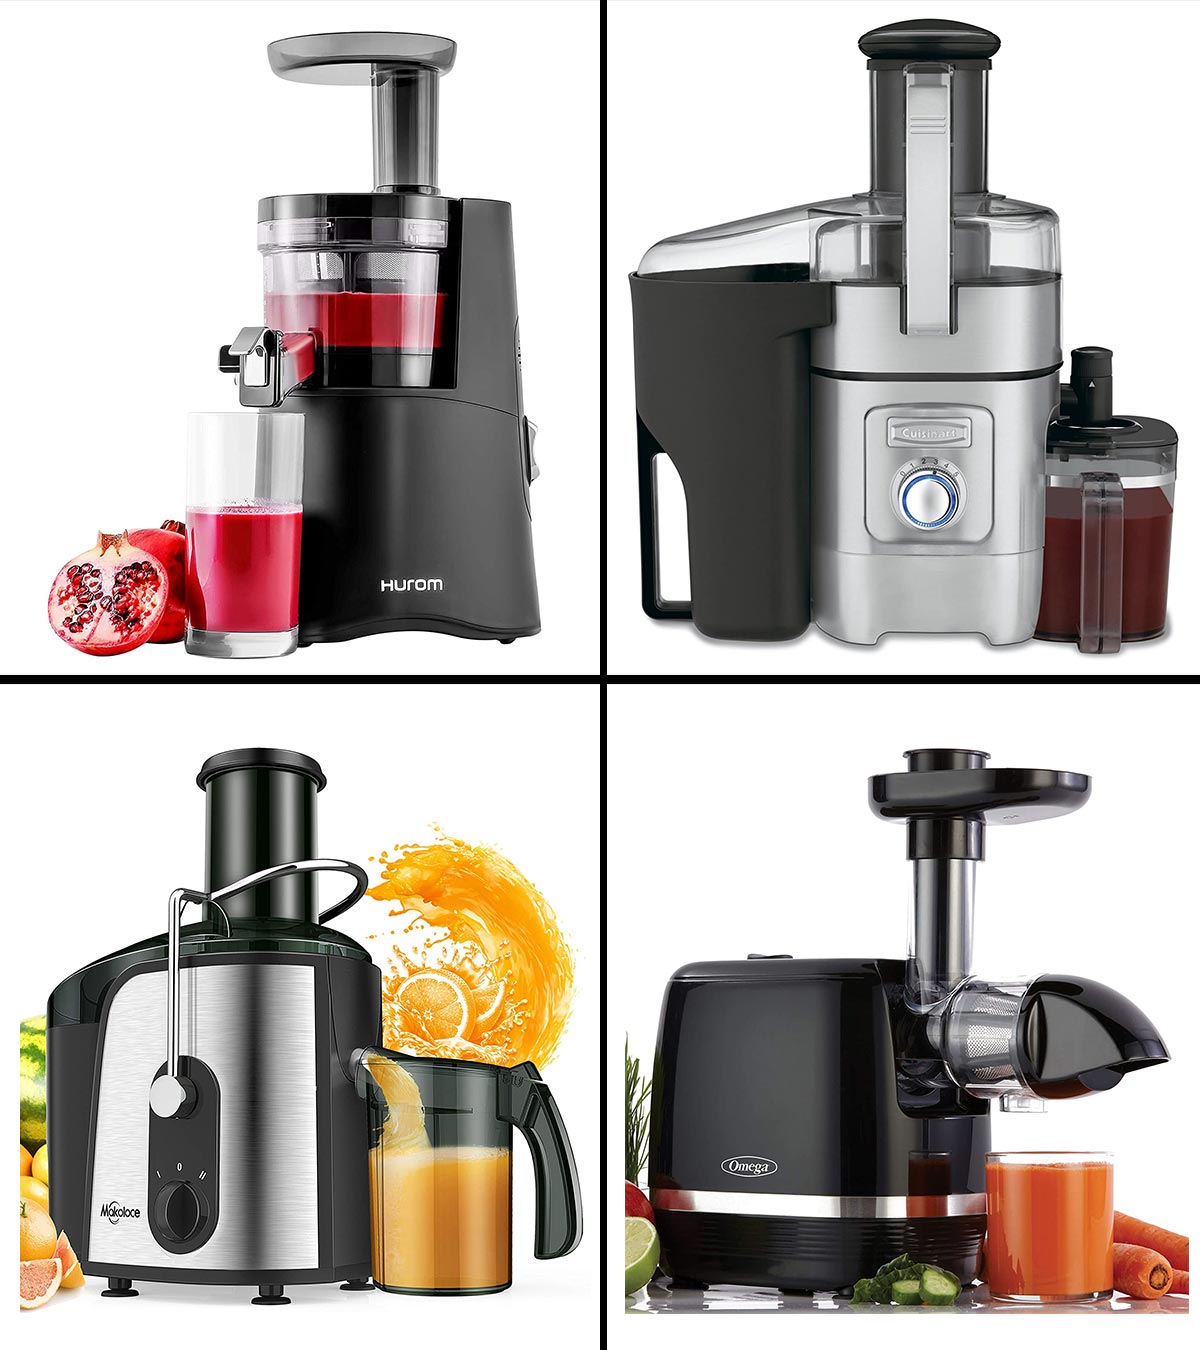 How to pick the right juicer - CNET